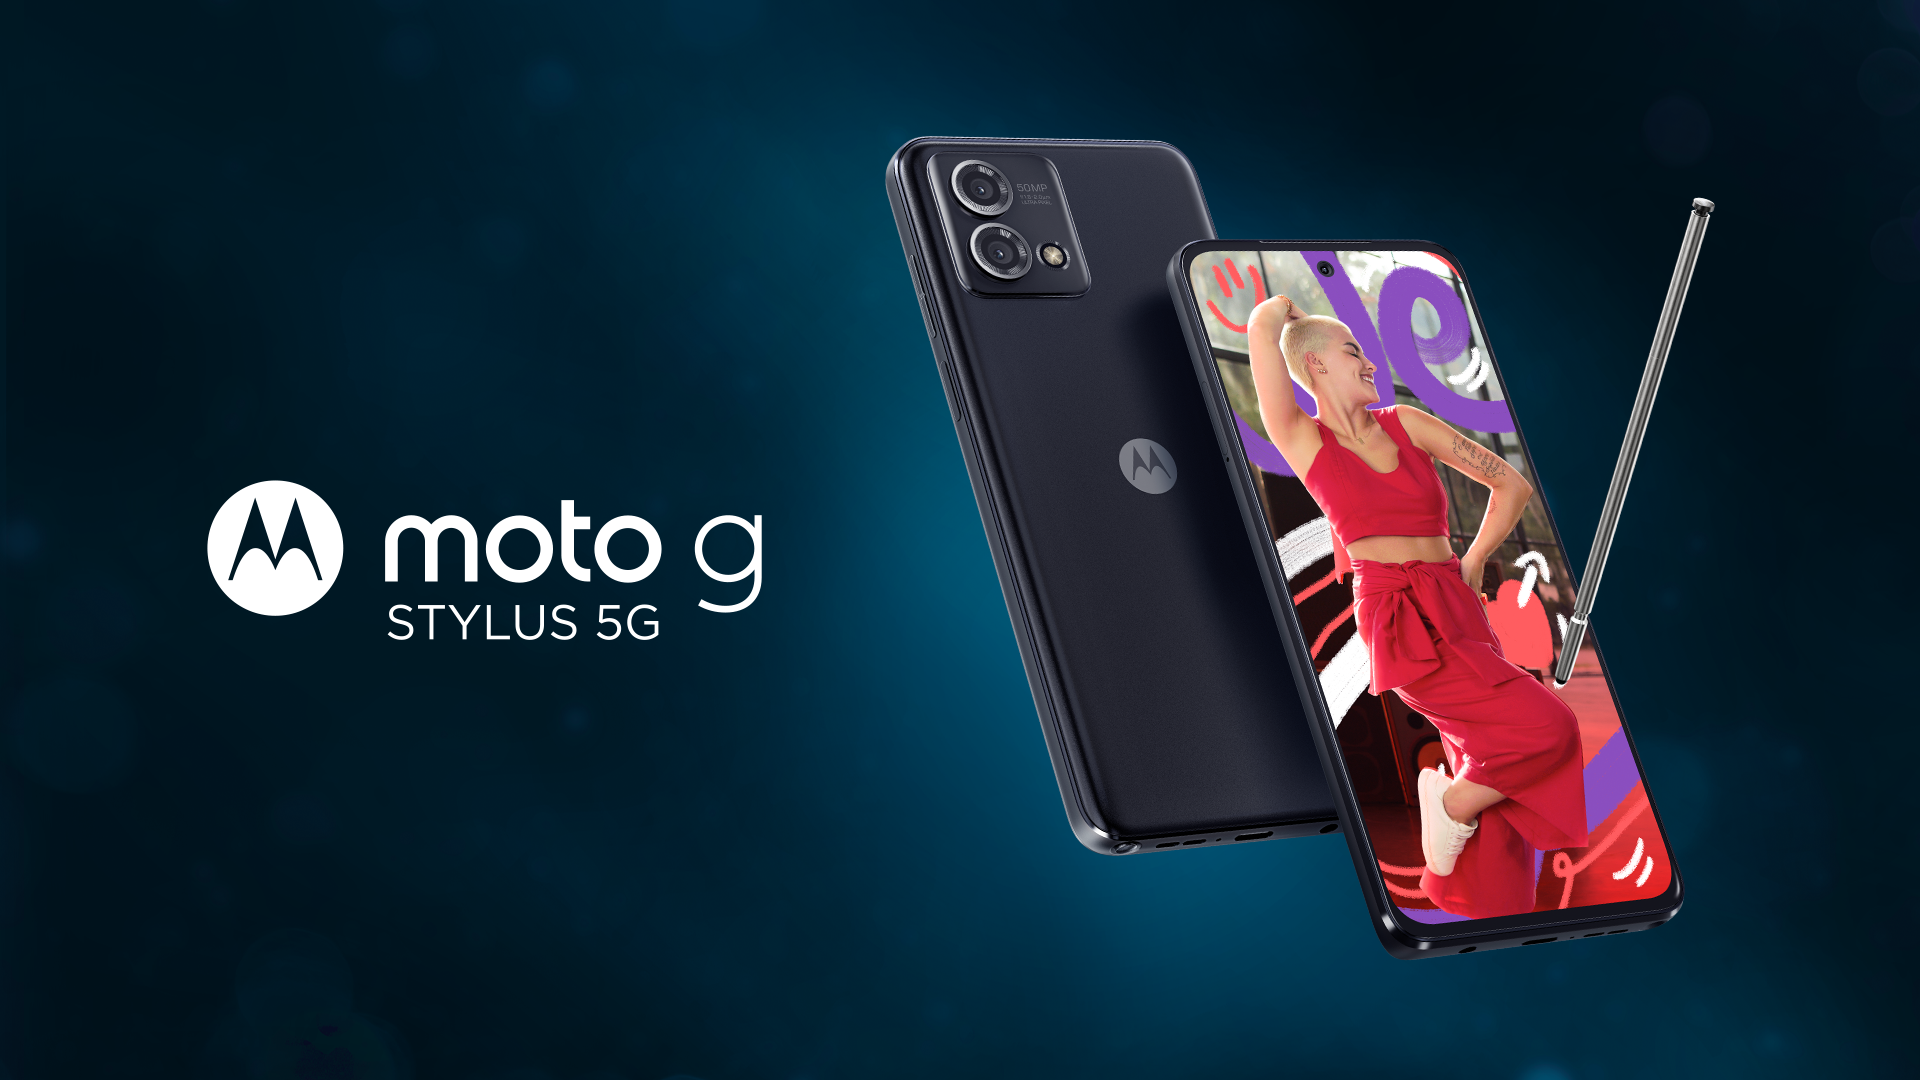 Create at the speed of your imagination with the new moto g stylus 5G